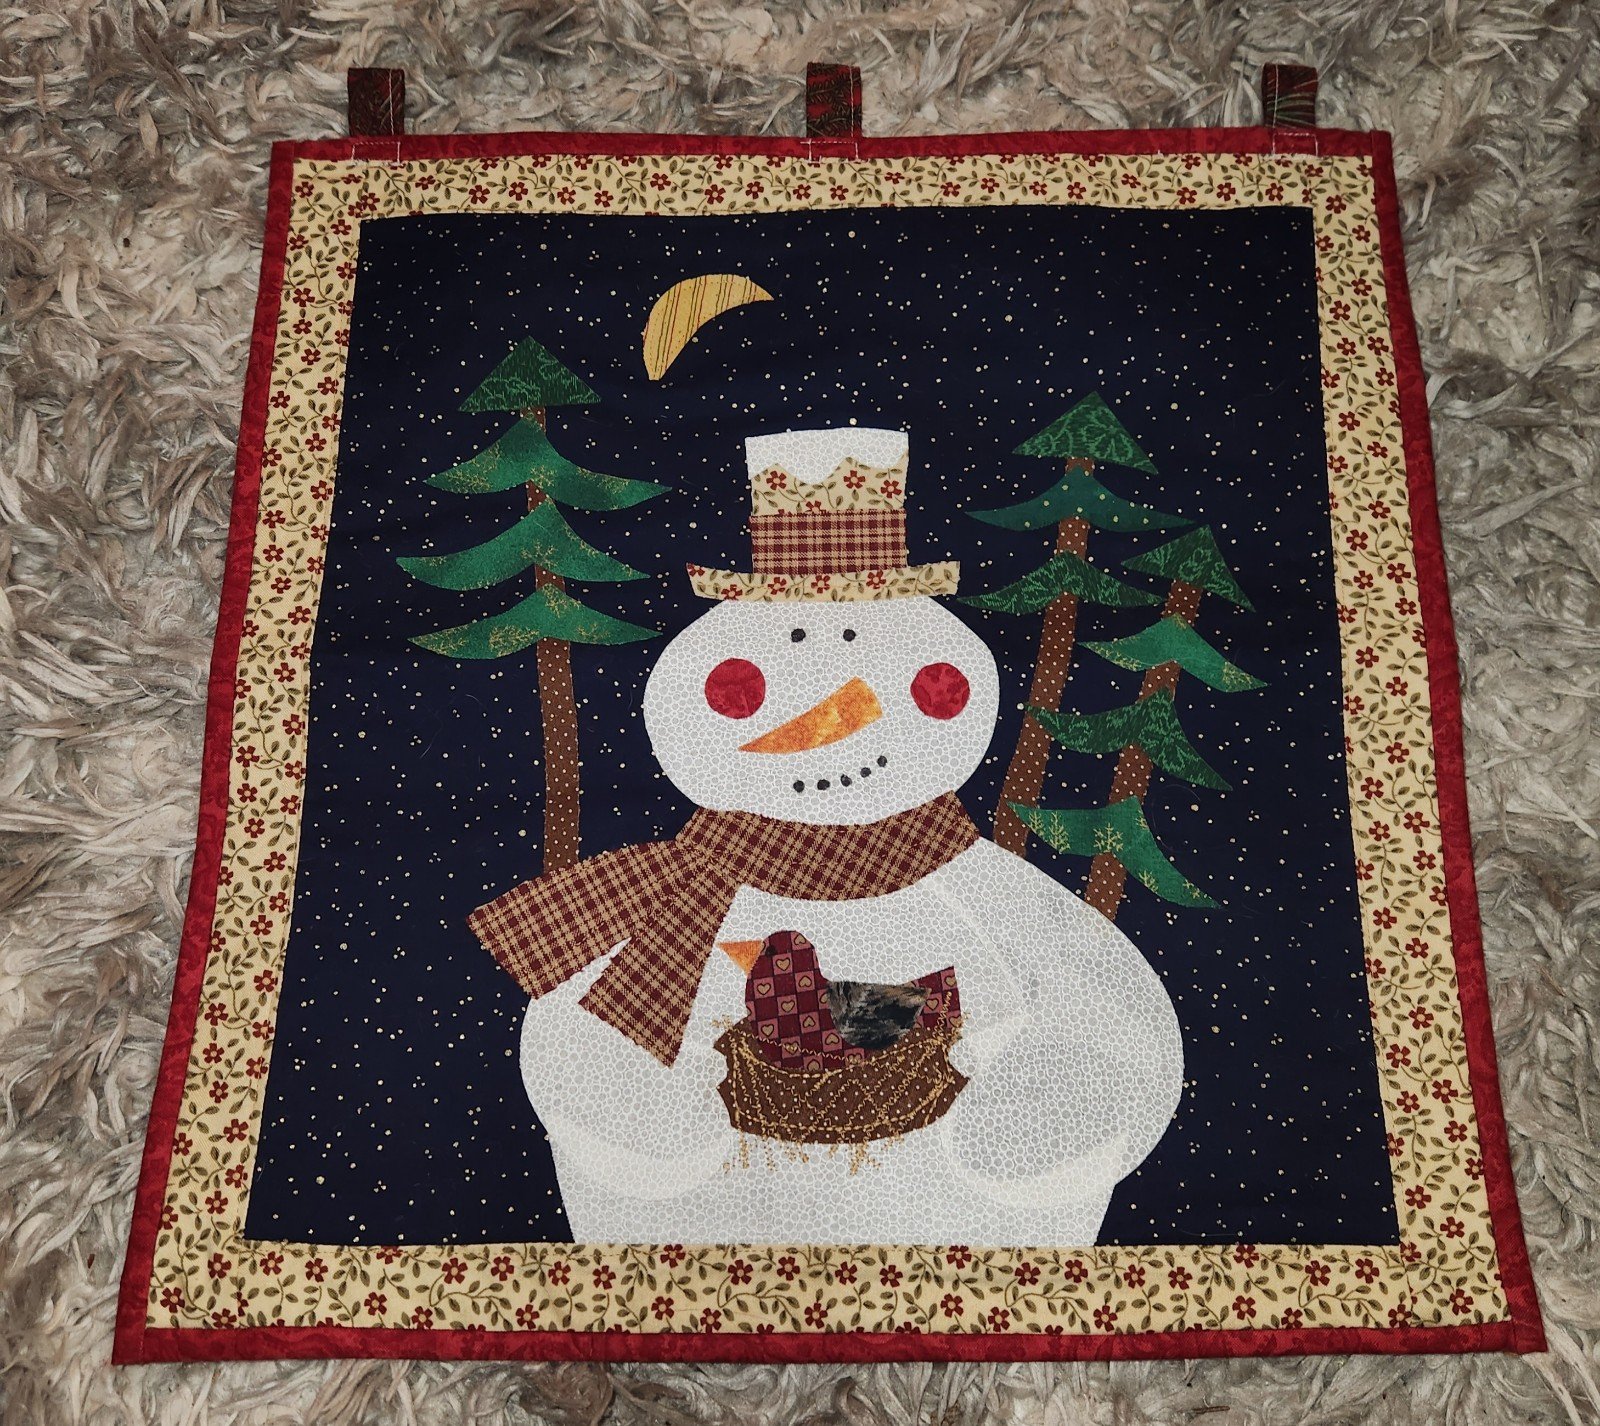 Quilted Patchwork Wall Hanging Snowman 14.5x14.5 Inches